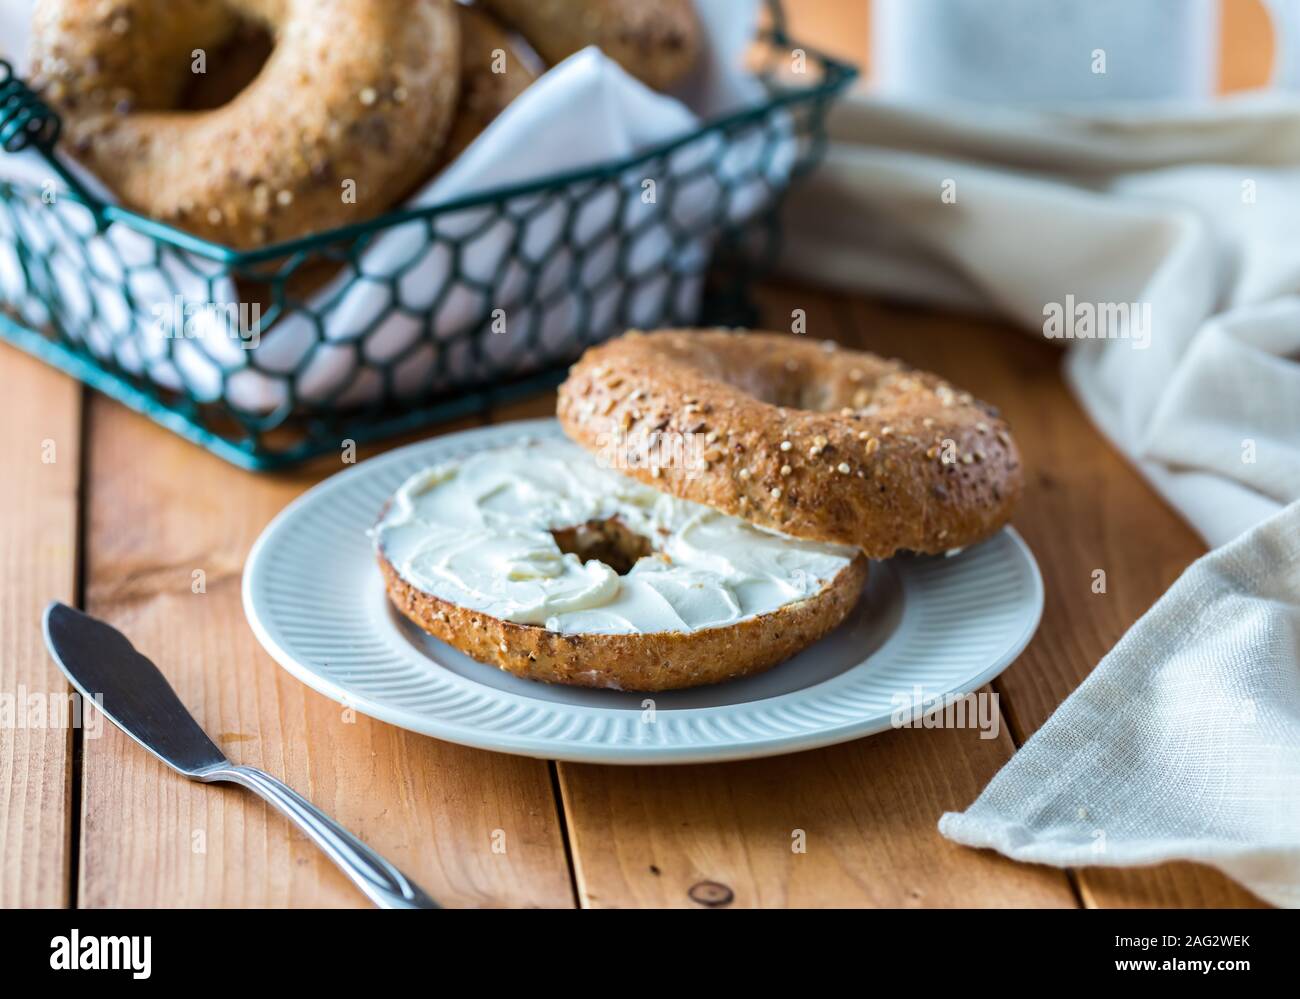 A multigrain bagel with cream cheese. Stock Photo